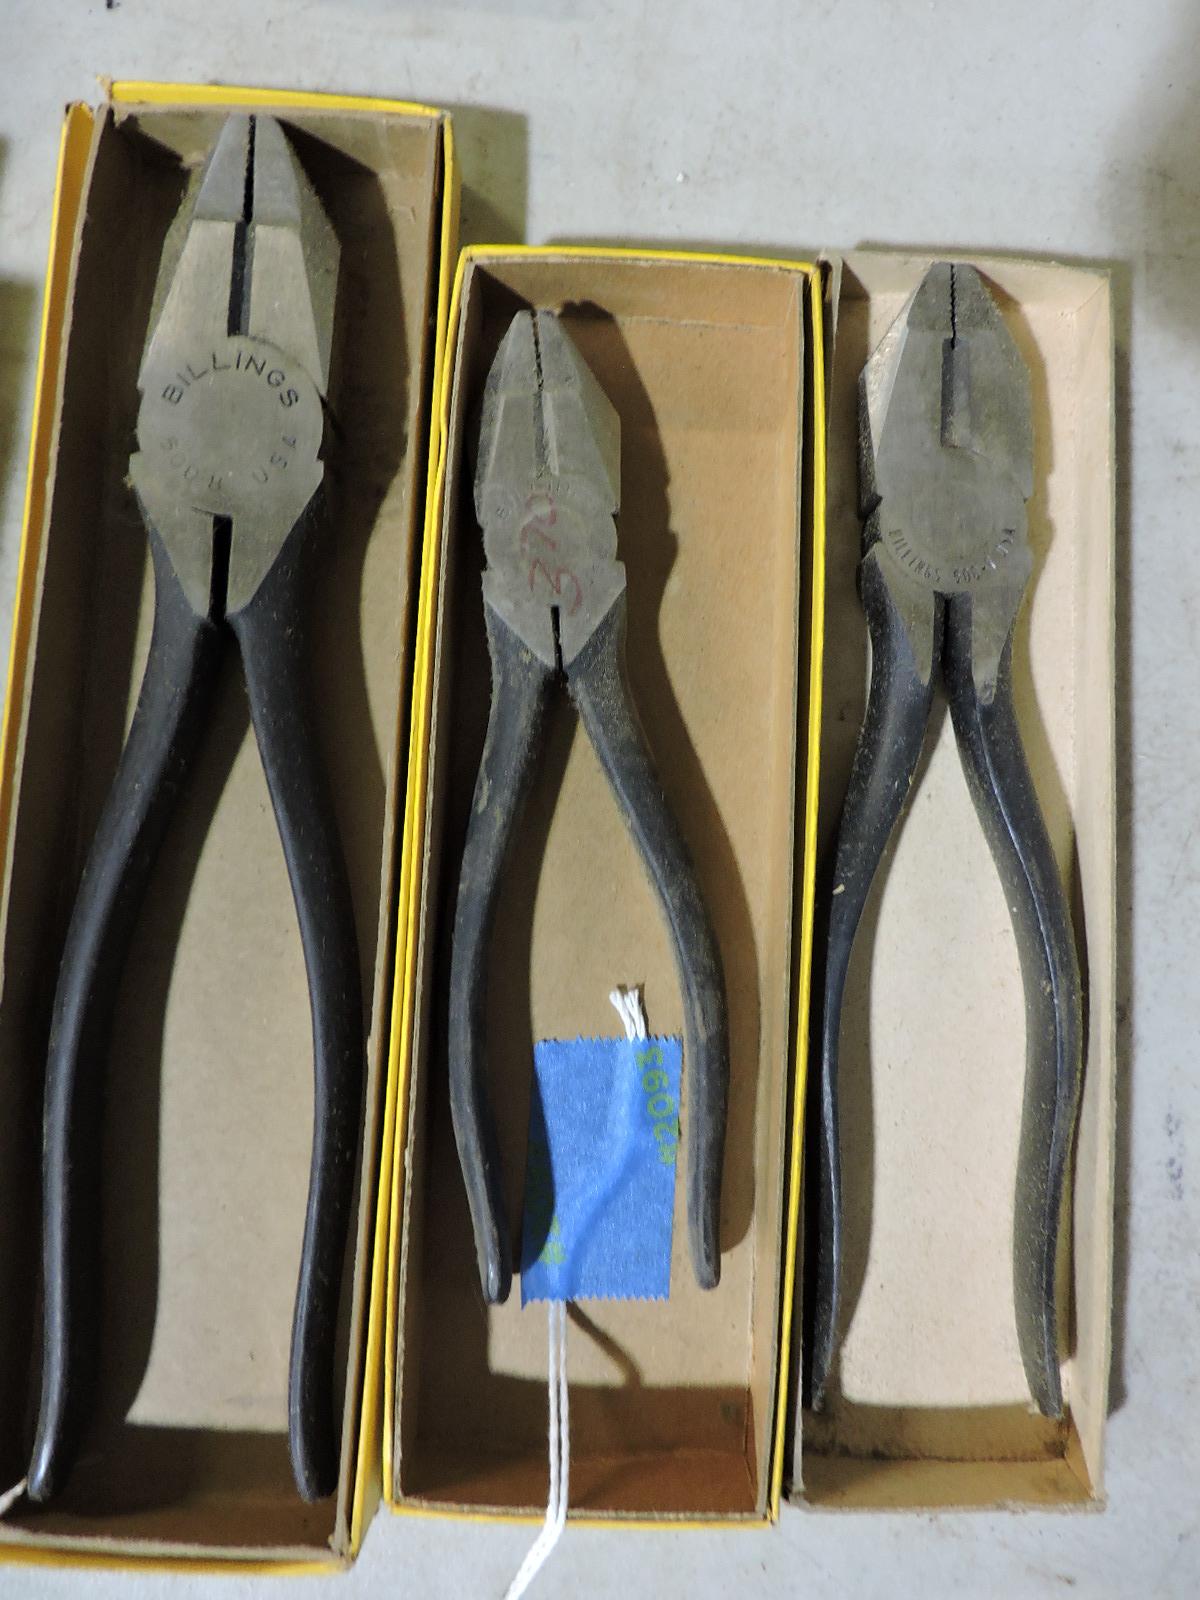 BILLINGS Brand Pliers (3 total) # 95-7 and # 500-13  / NEW Old Stock